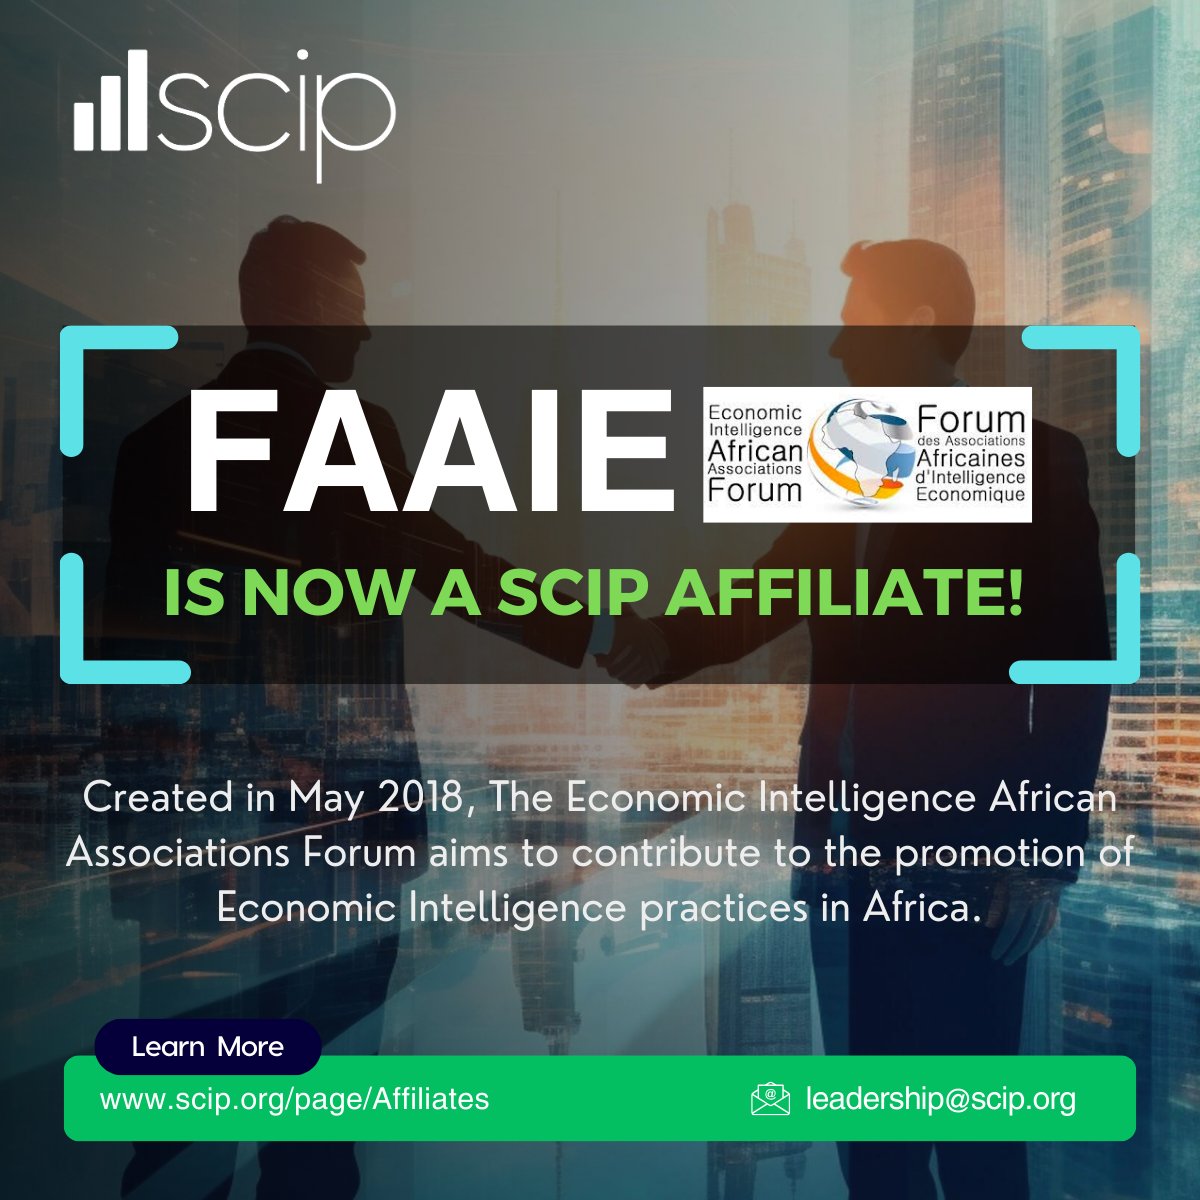 We are excited to share that the #EconomicIntelligence #African #Associations Forum (#FAAIE) is now a #SCIP #Affiliate! 

Working together towards the #Economic Development of the Pan-African community: faaie.africa

Join #SCIP as an #Affiliate: scip.org/page/Affiliates